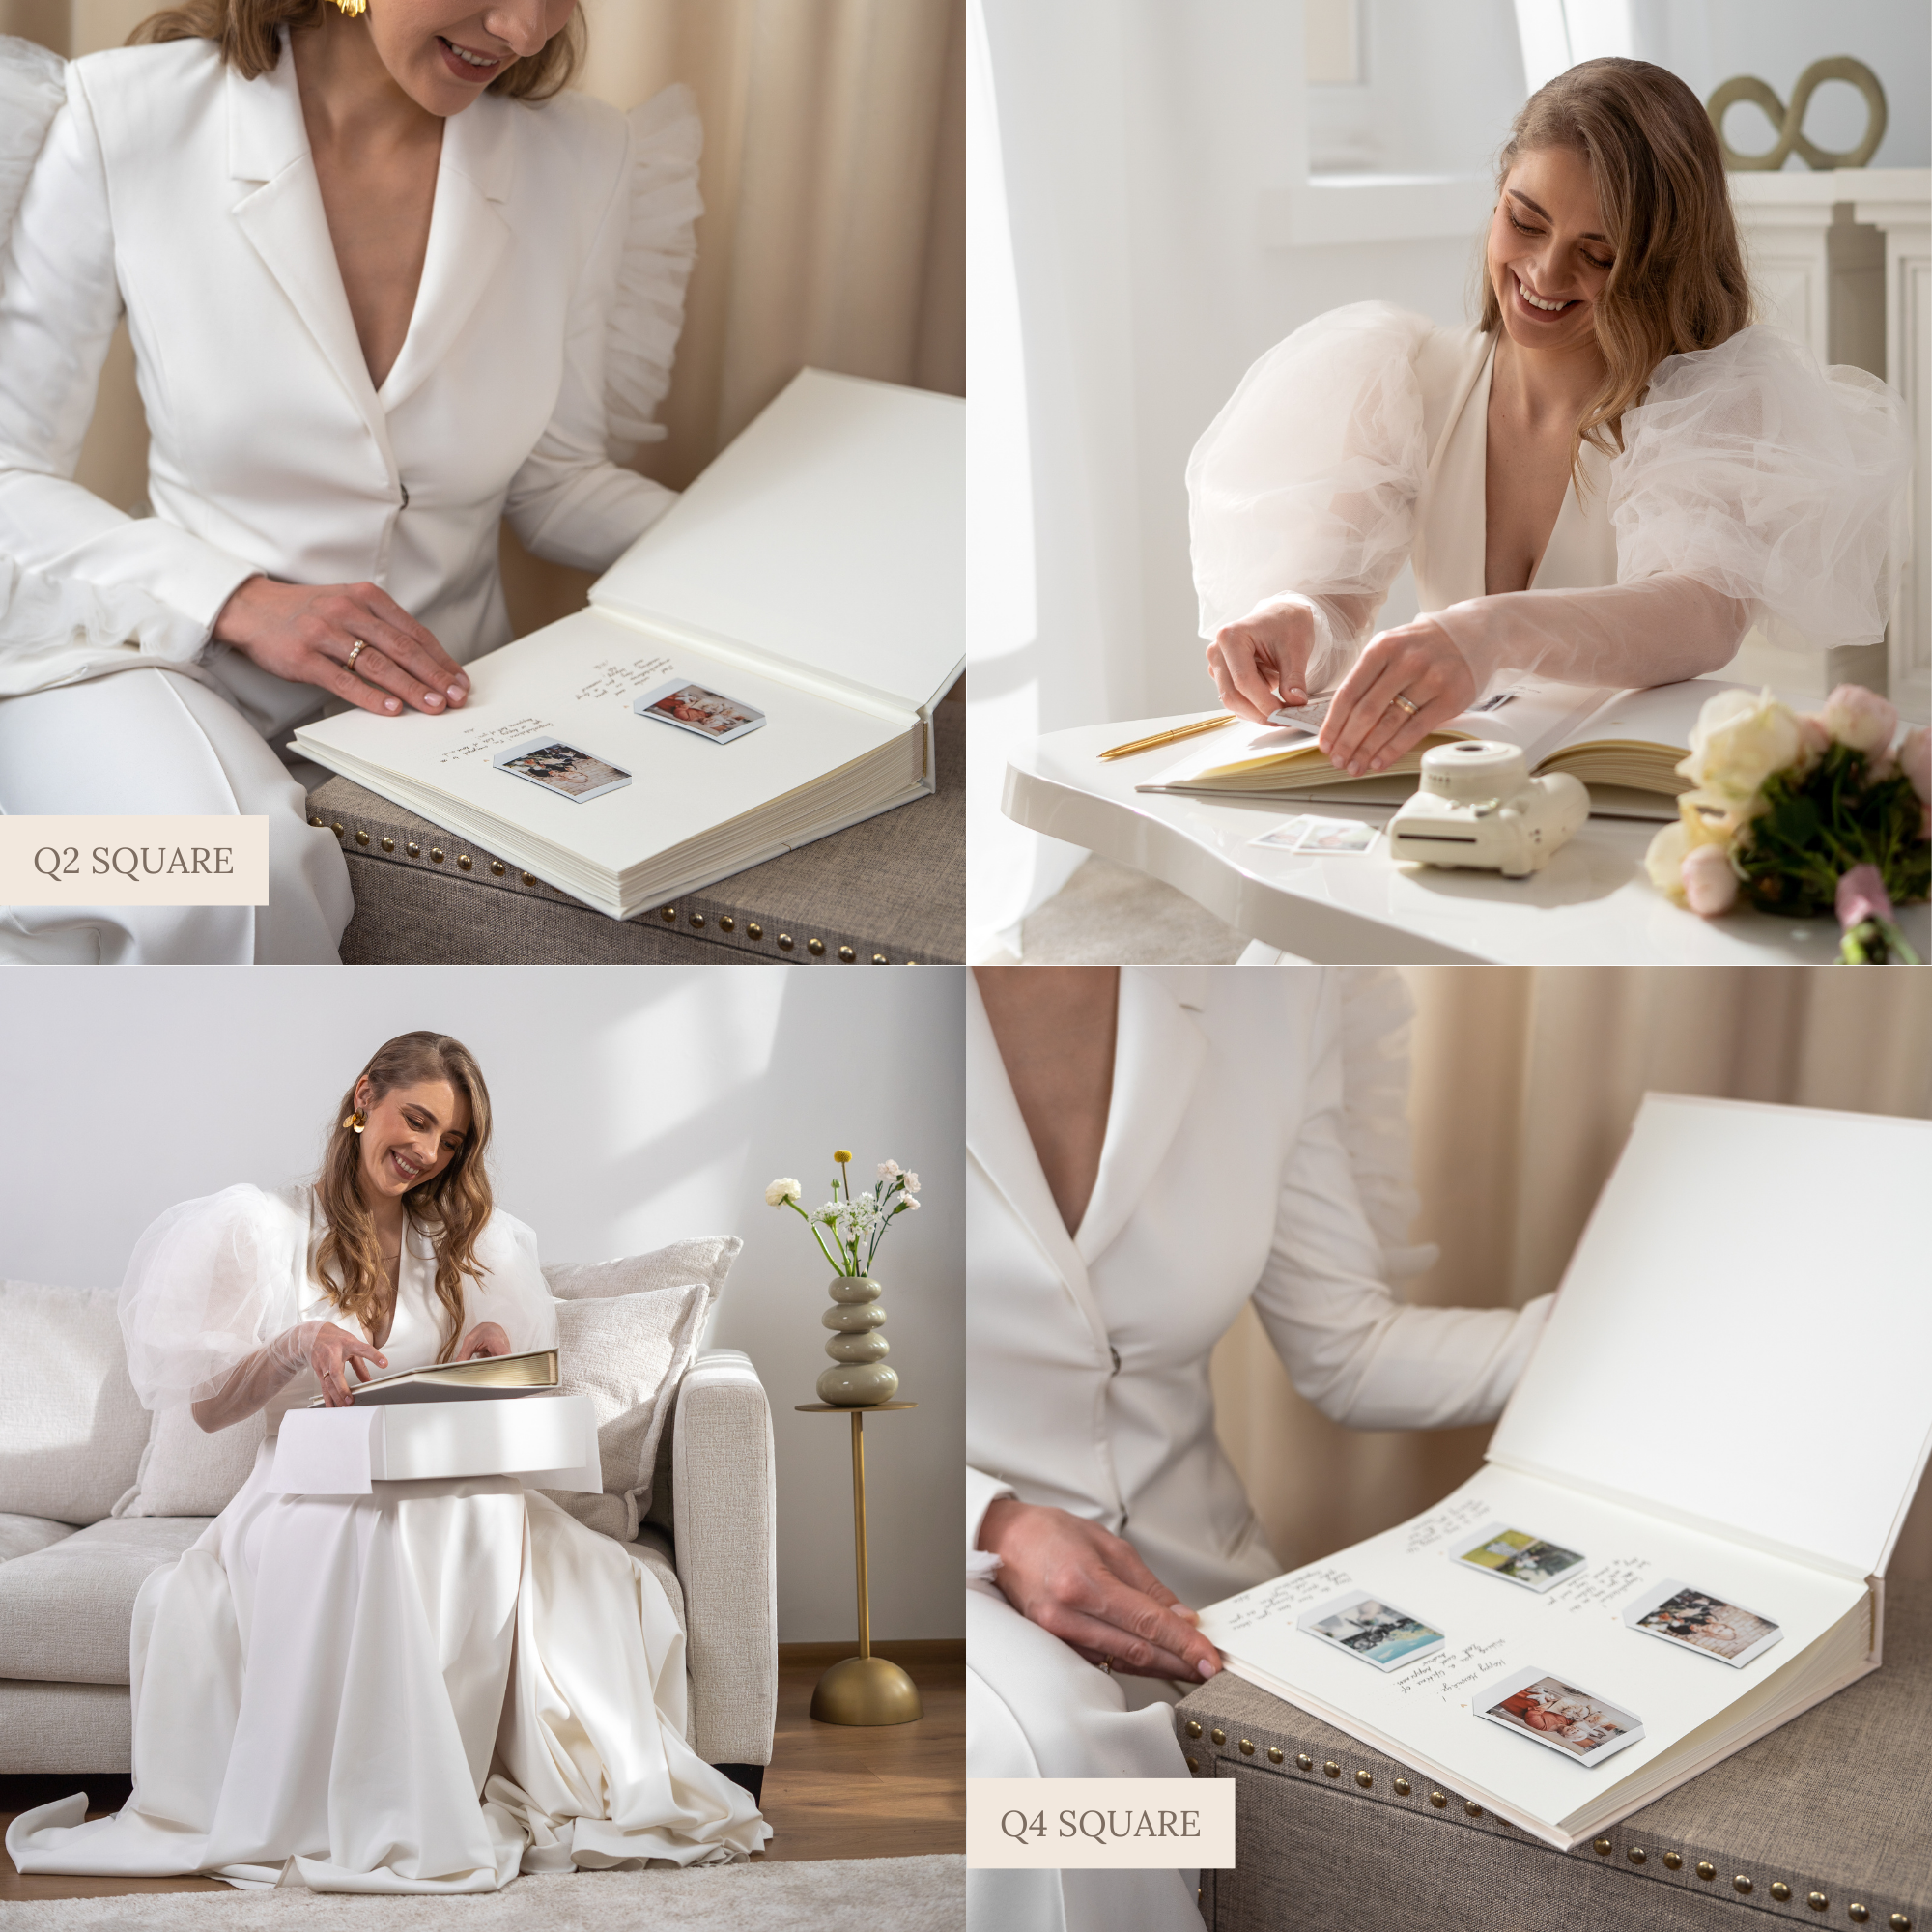 Ivory, White Velour | Guest Book